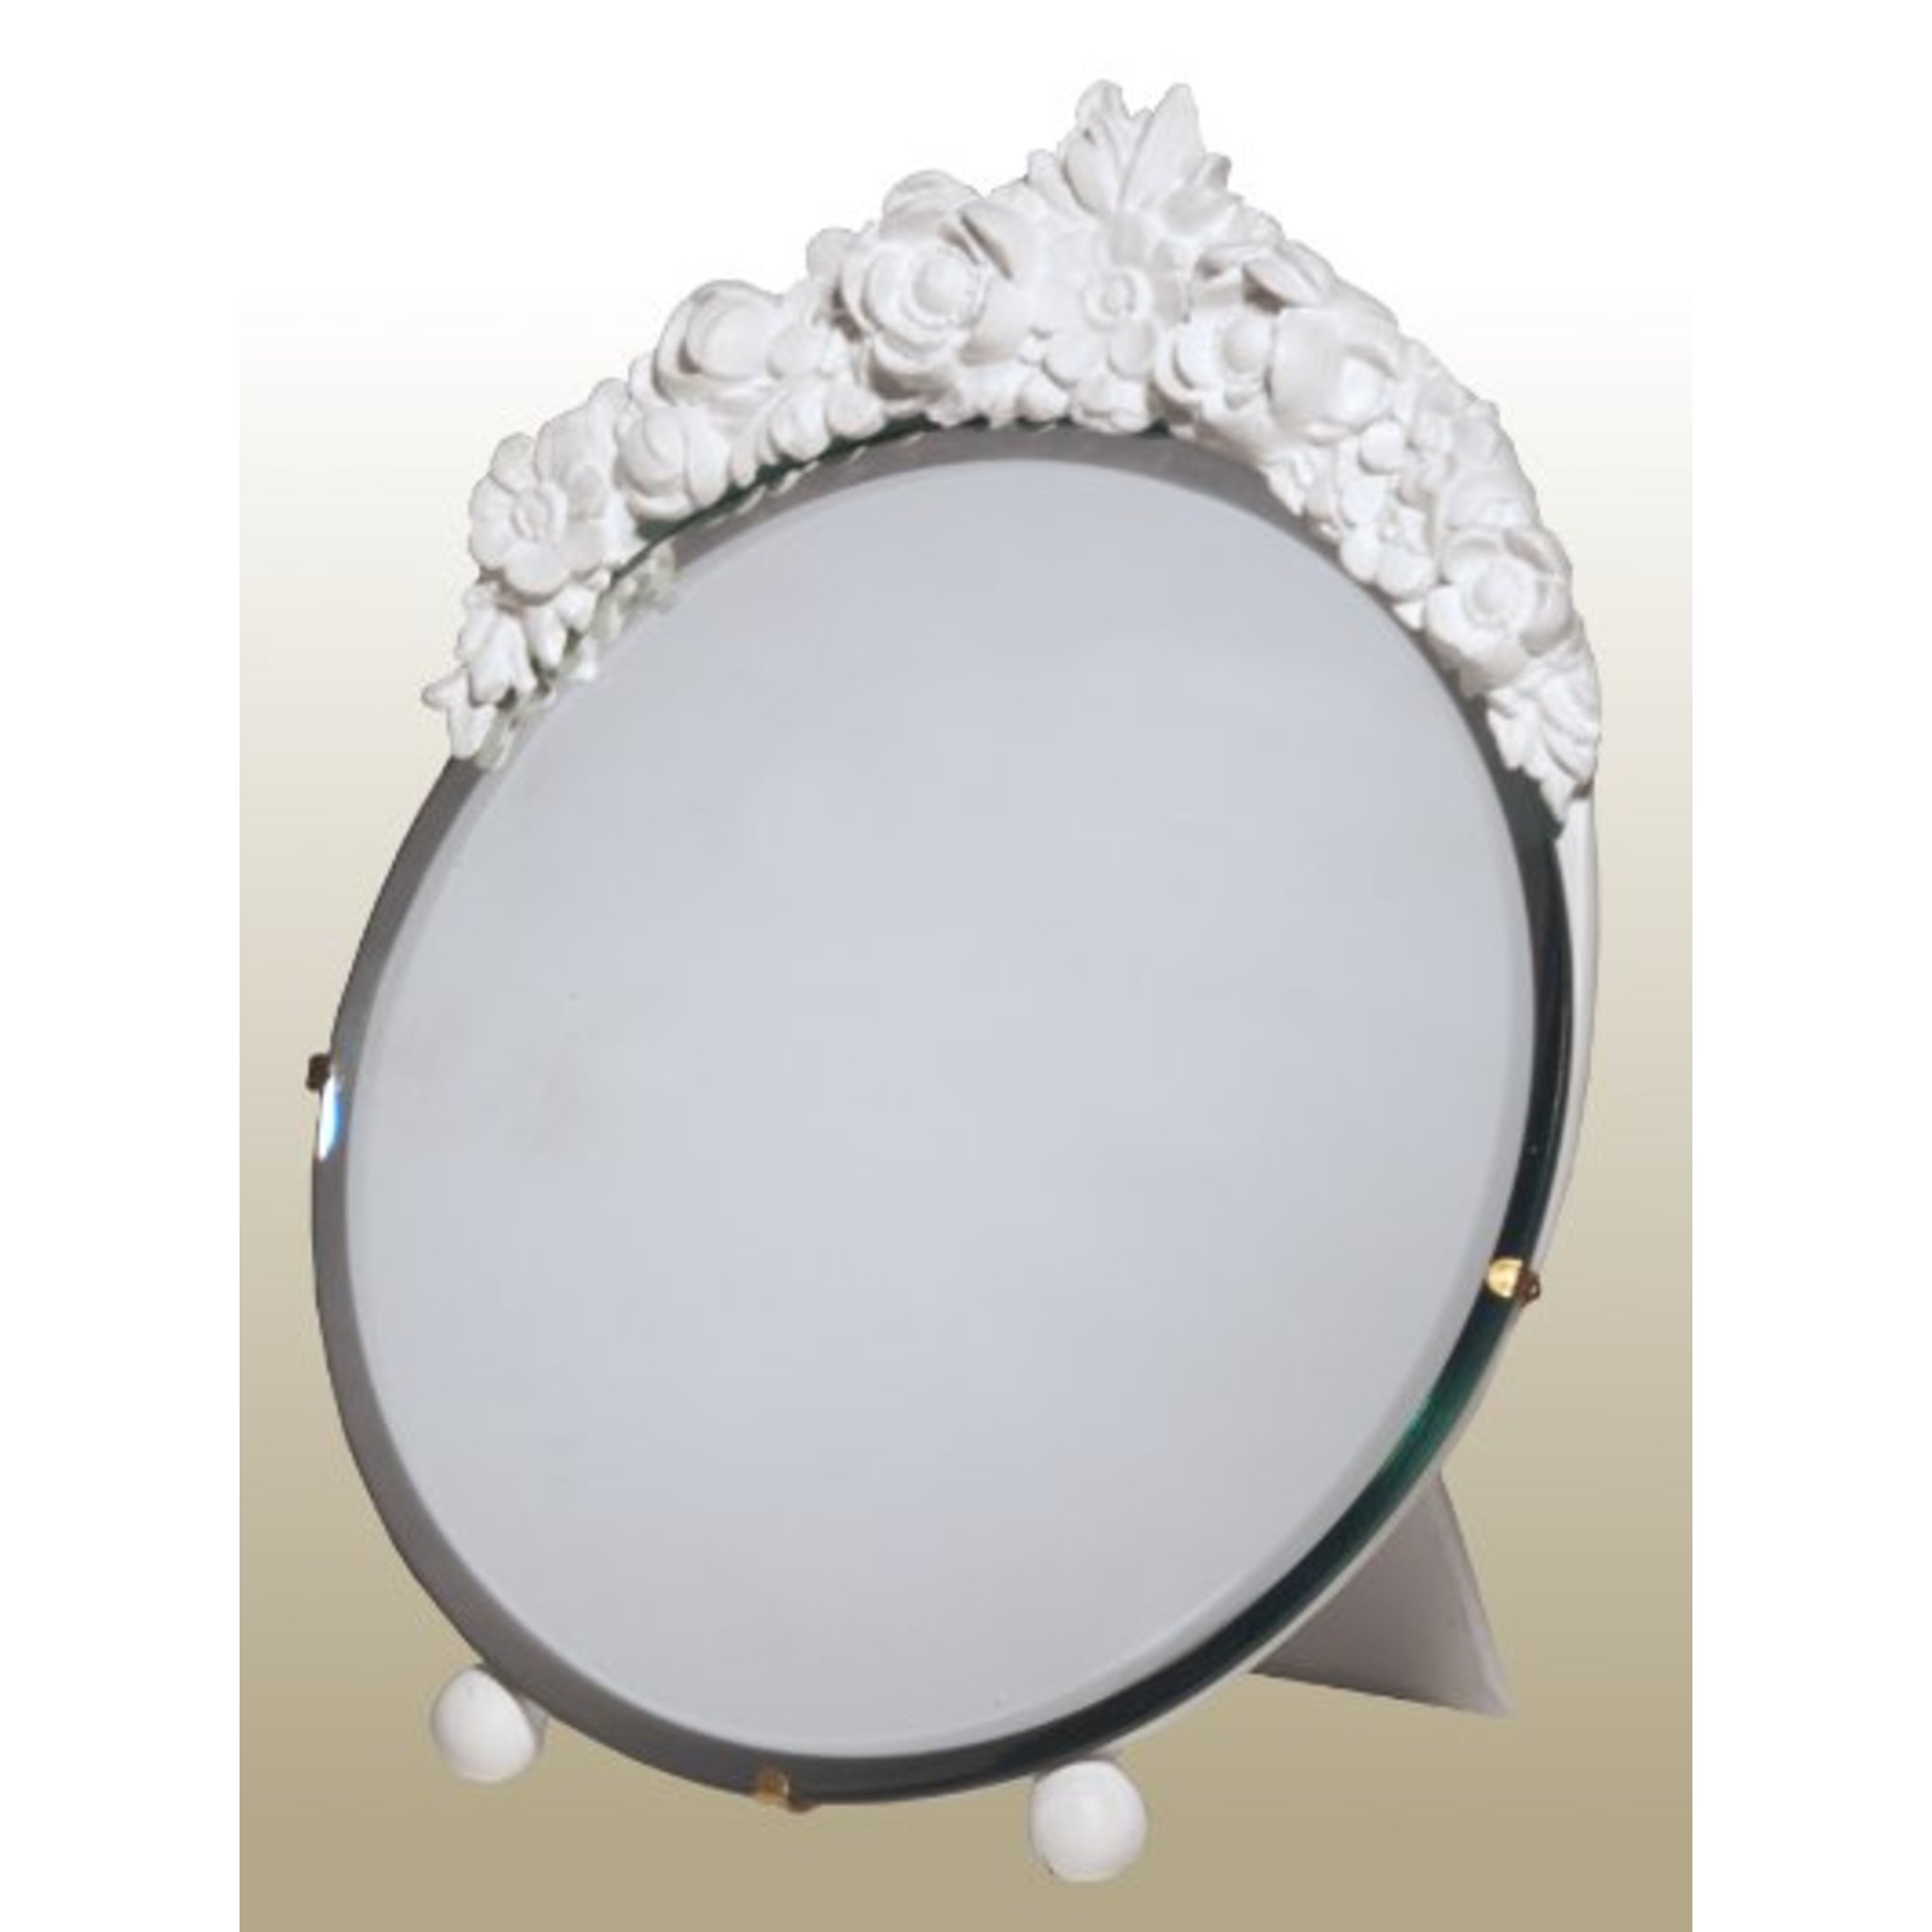 Barbola Floral White Chalk Paint Round Decorative Table or Wall Mirror